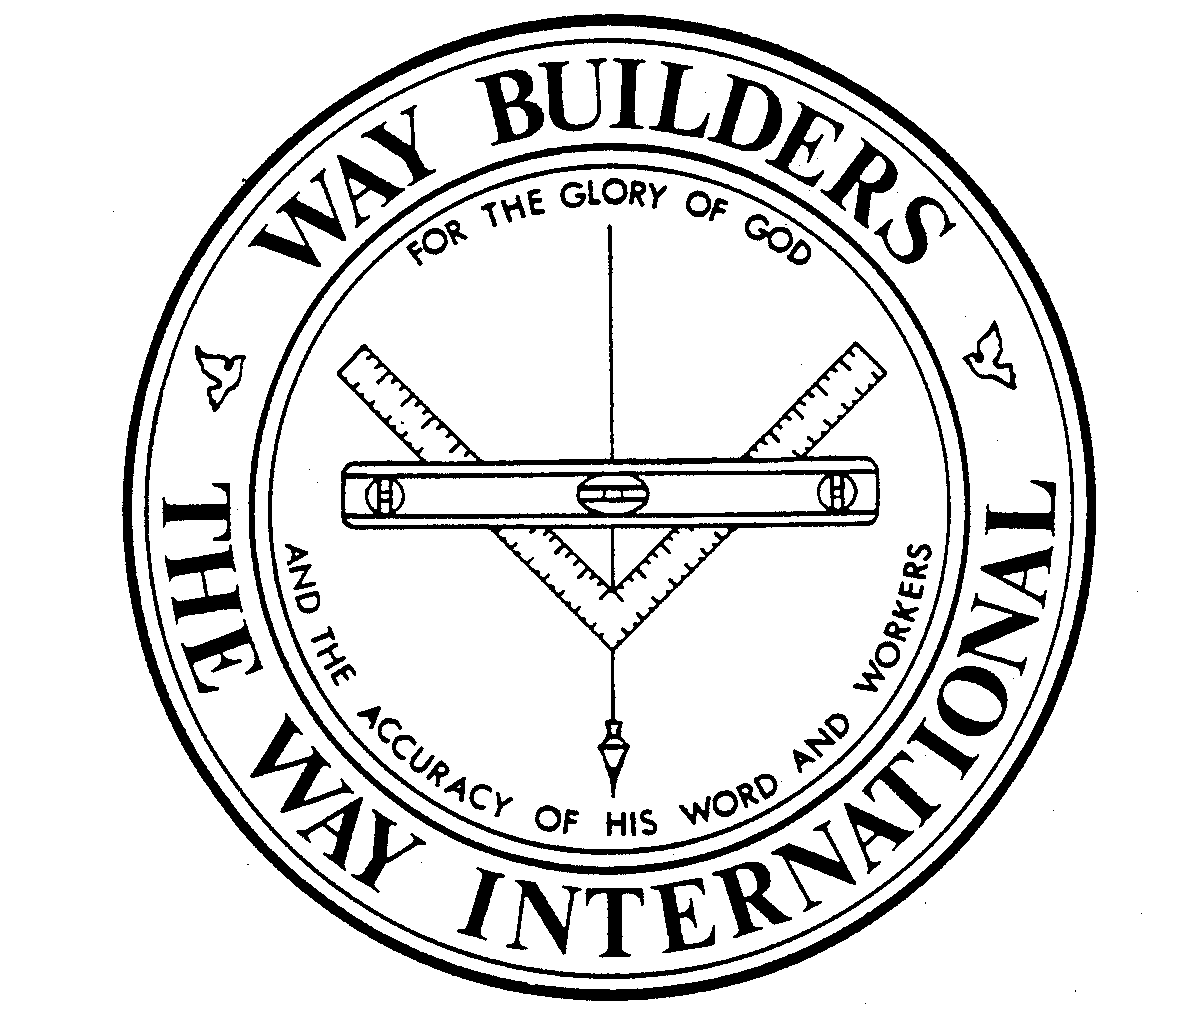  WAY BUILDERS THE WAY INTERNATIONAL FOR THE GLORY OF GOD AND THE ACCURACY OF HIS WORD AND WORKERS